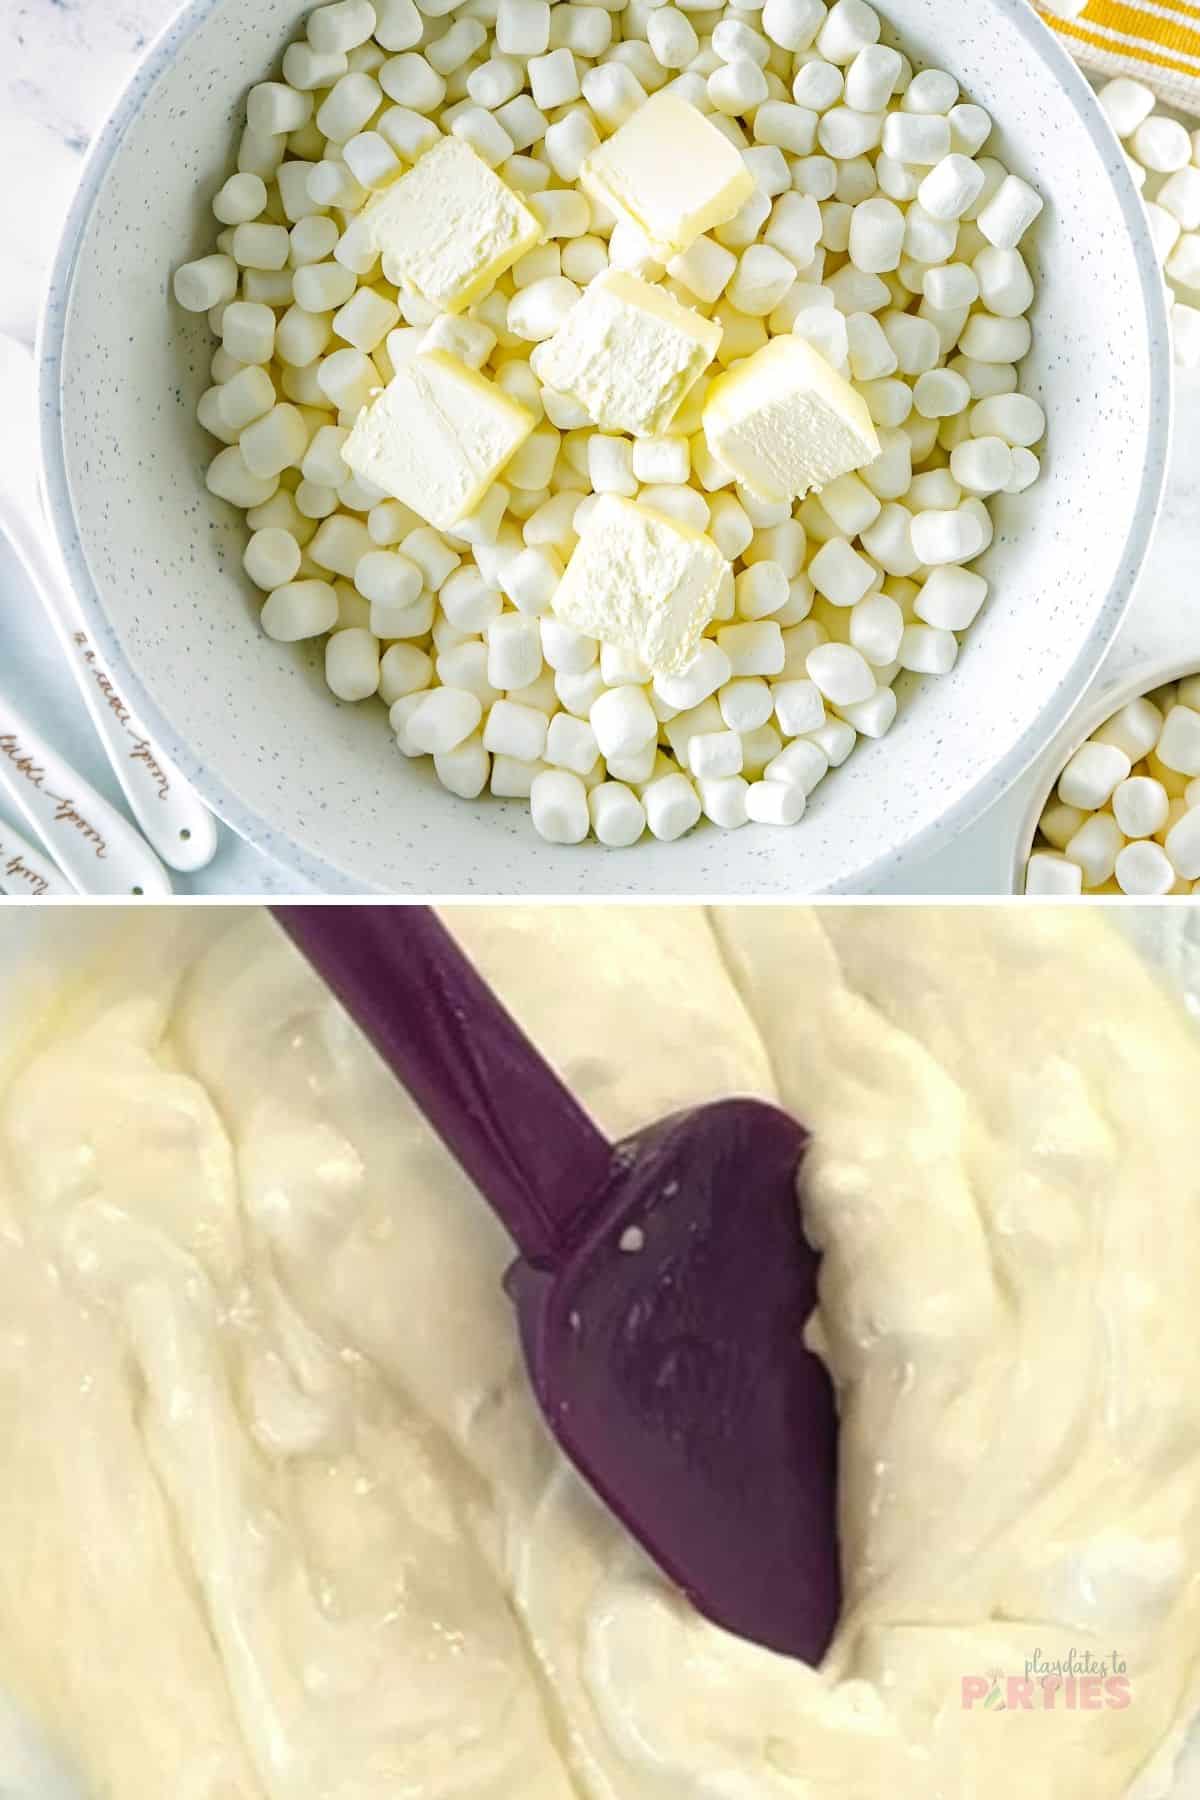 Melting marshmallows and butter to make cereal treats.